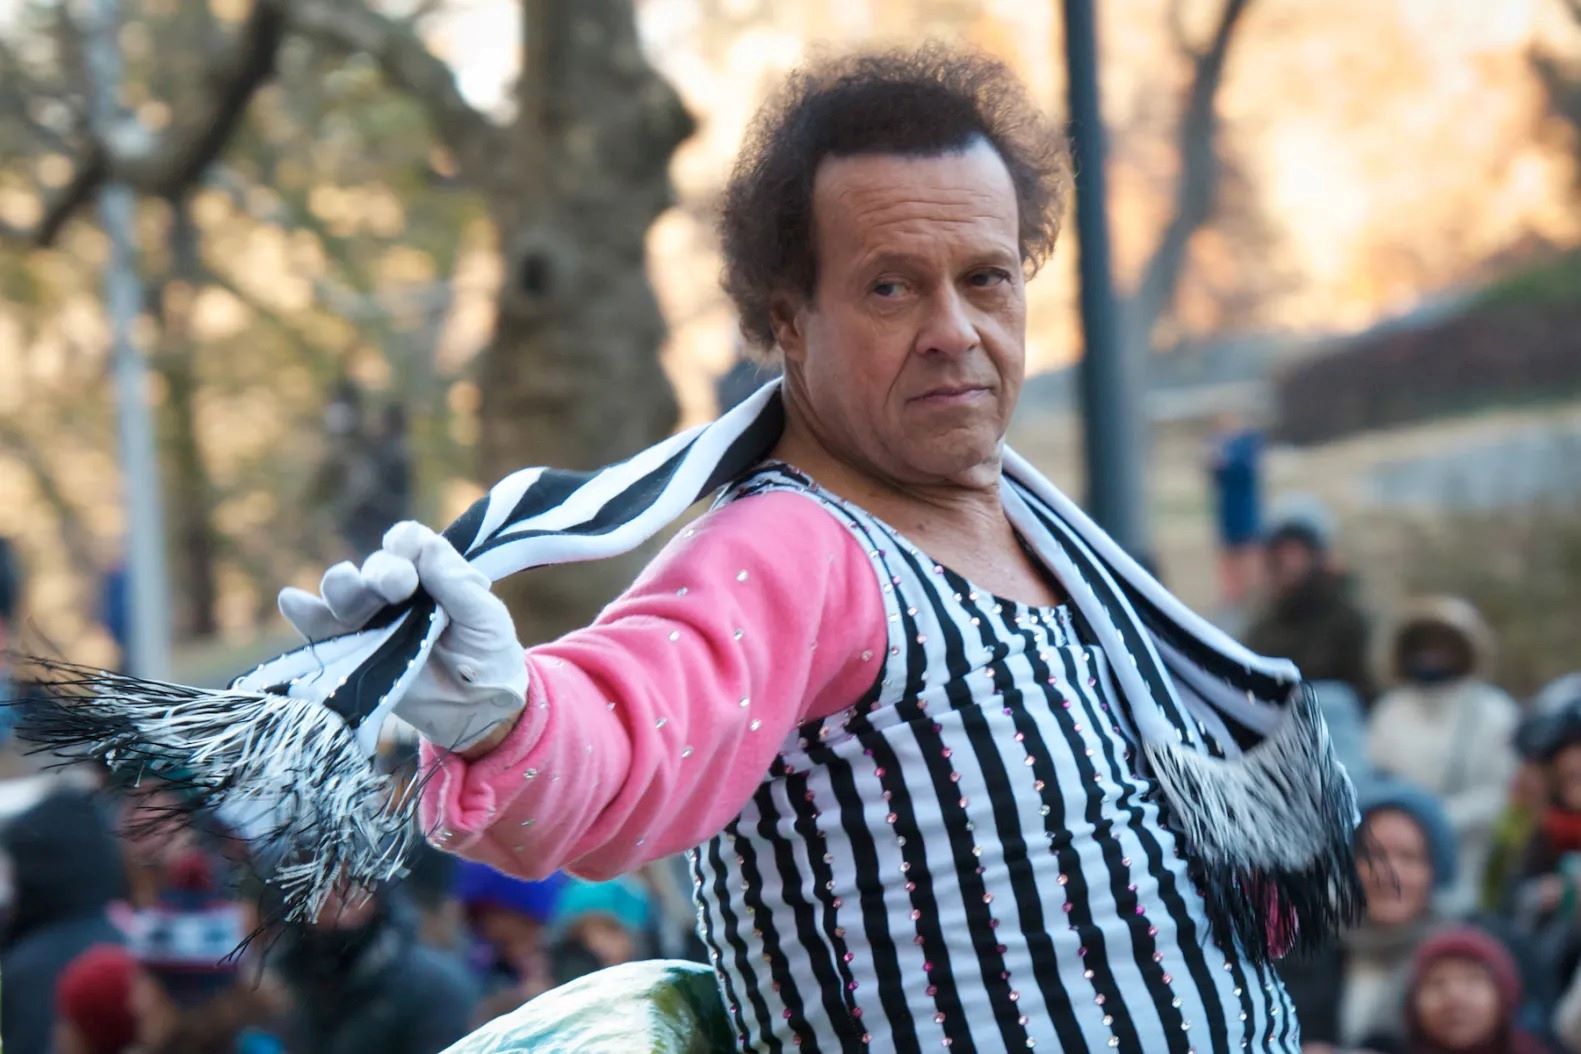 Richard Simmons Speaks Out Against Unauthorized Biopic Starring Pauly Shore